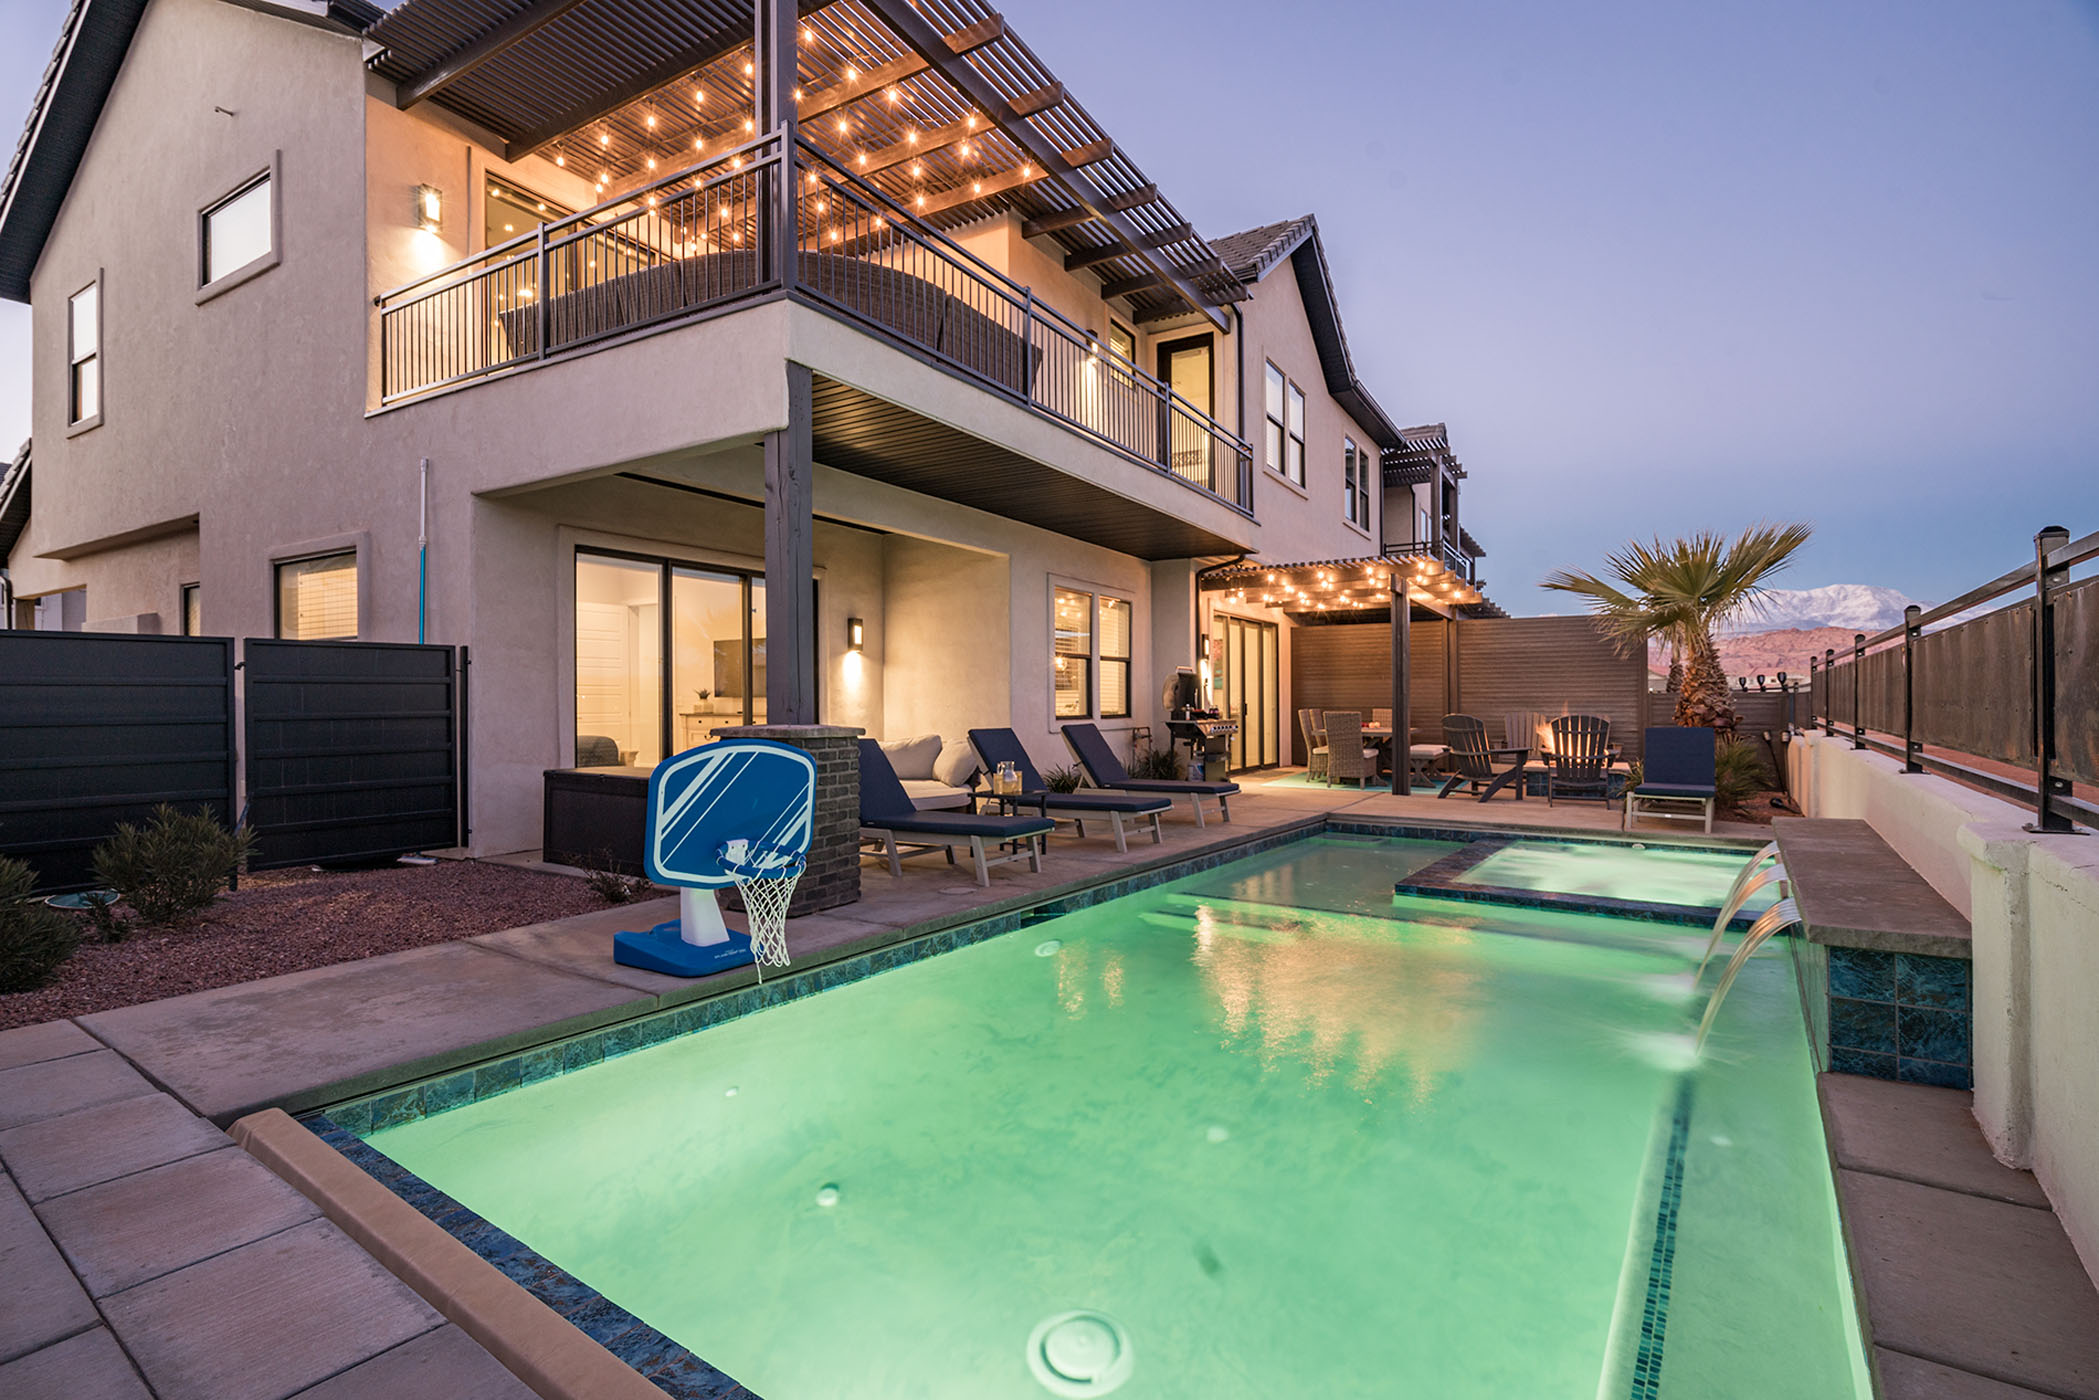 62| Blissful Poolhouse at Ocotillo Springs with Private Pool